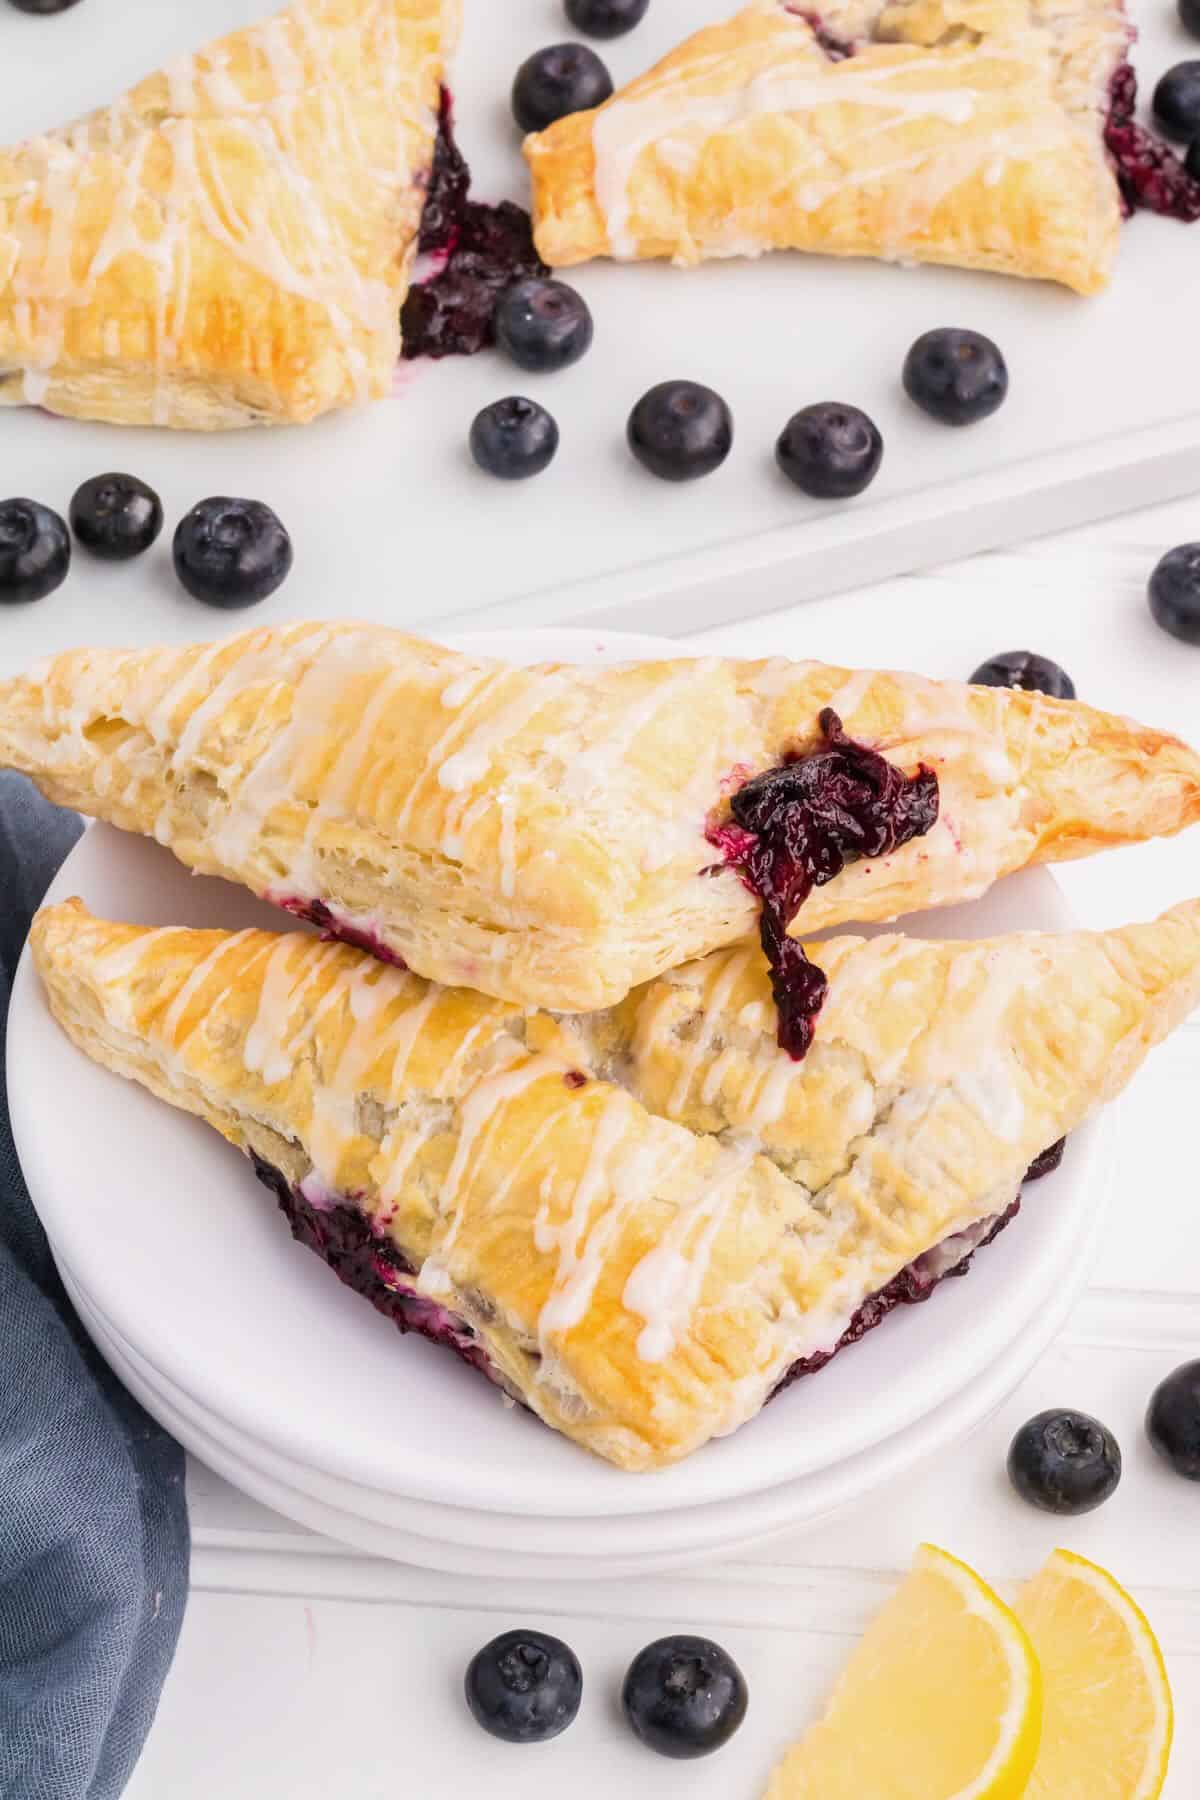 Two blueberry turnovers with a bit of blueberry filling oozing out on a white plate